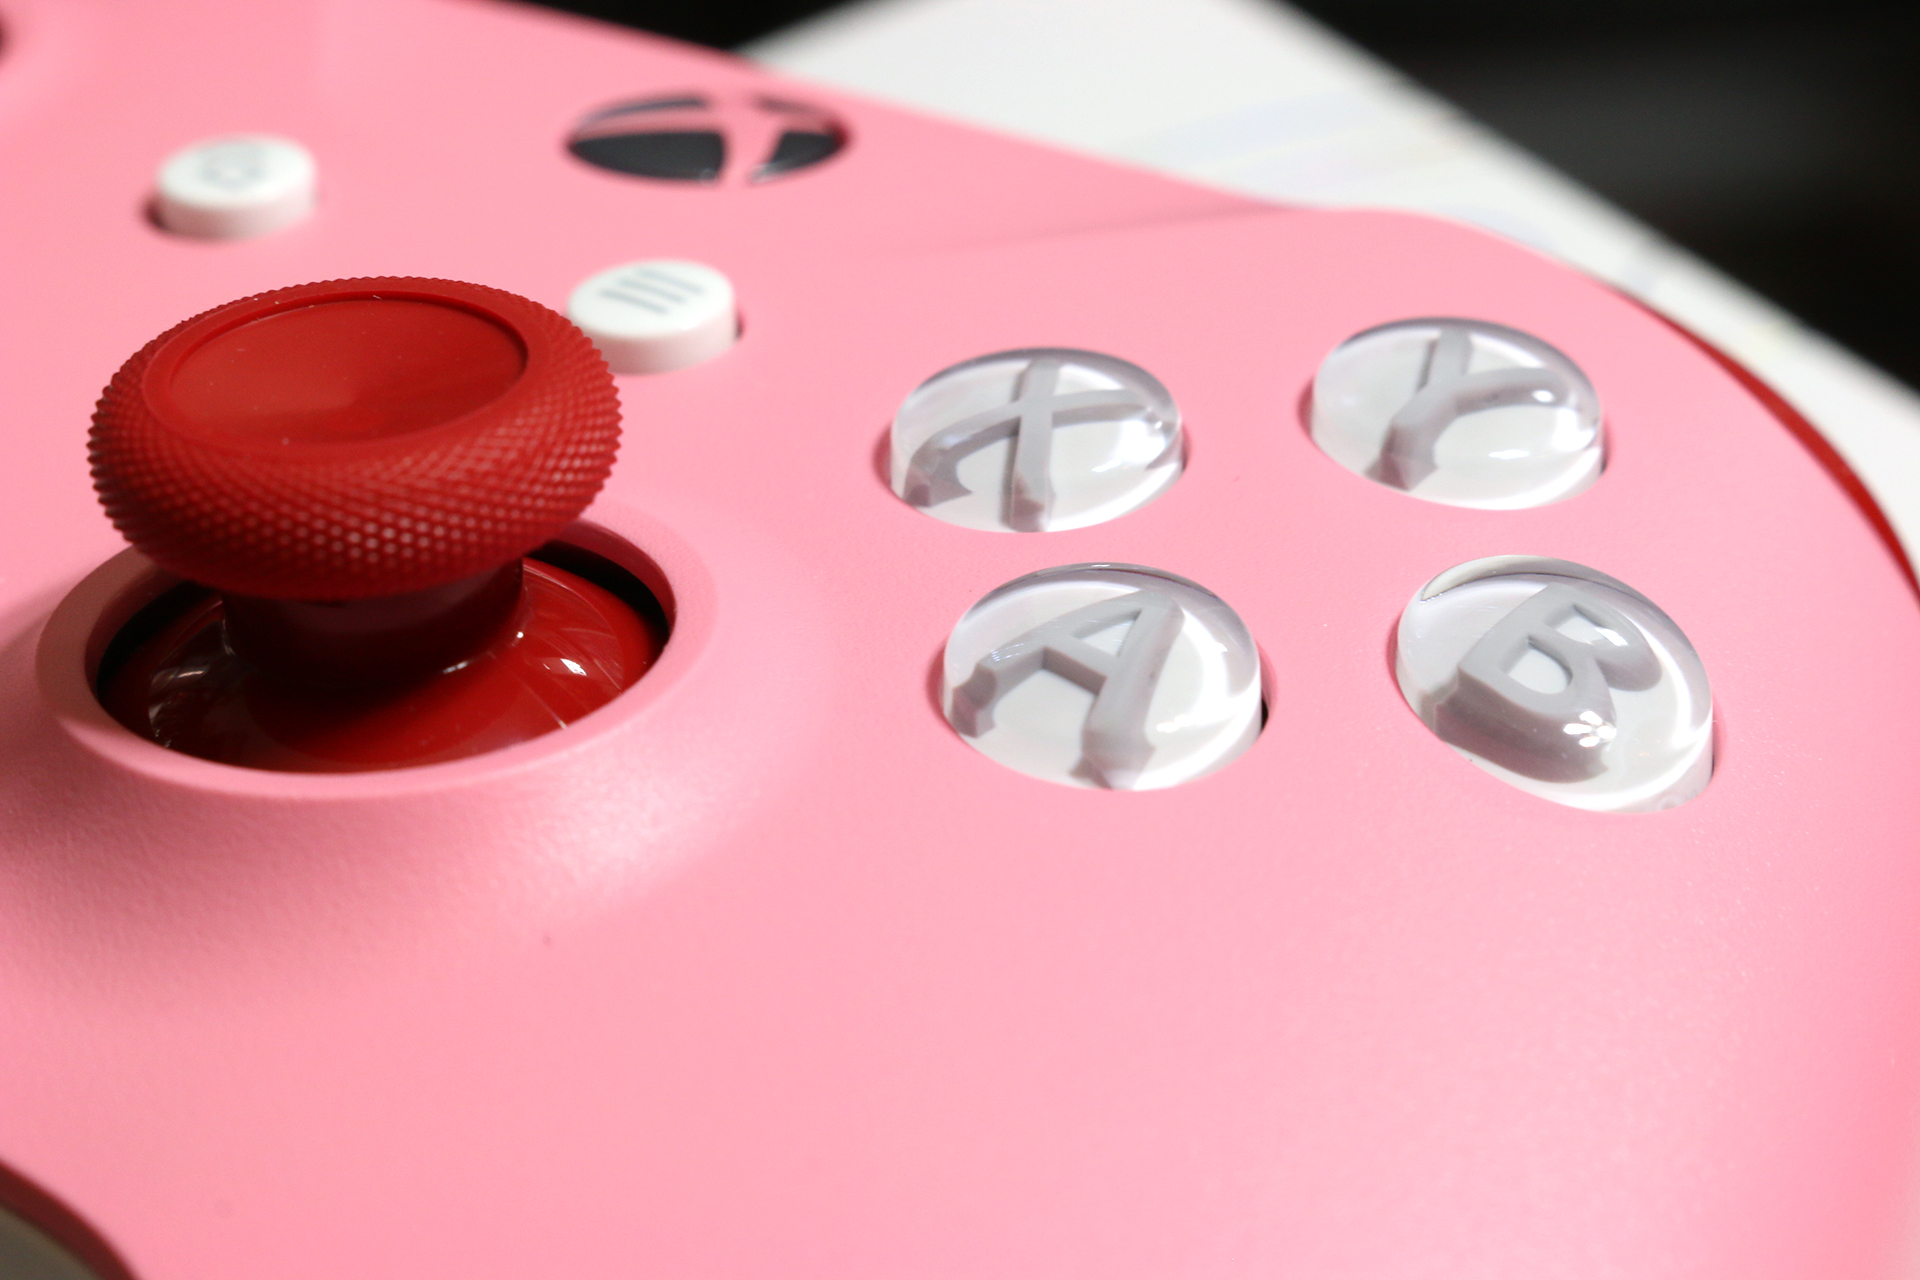 It’s Hard To Make The Official Xbox One Custom Controllers Look Bad